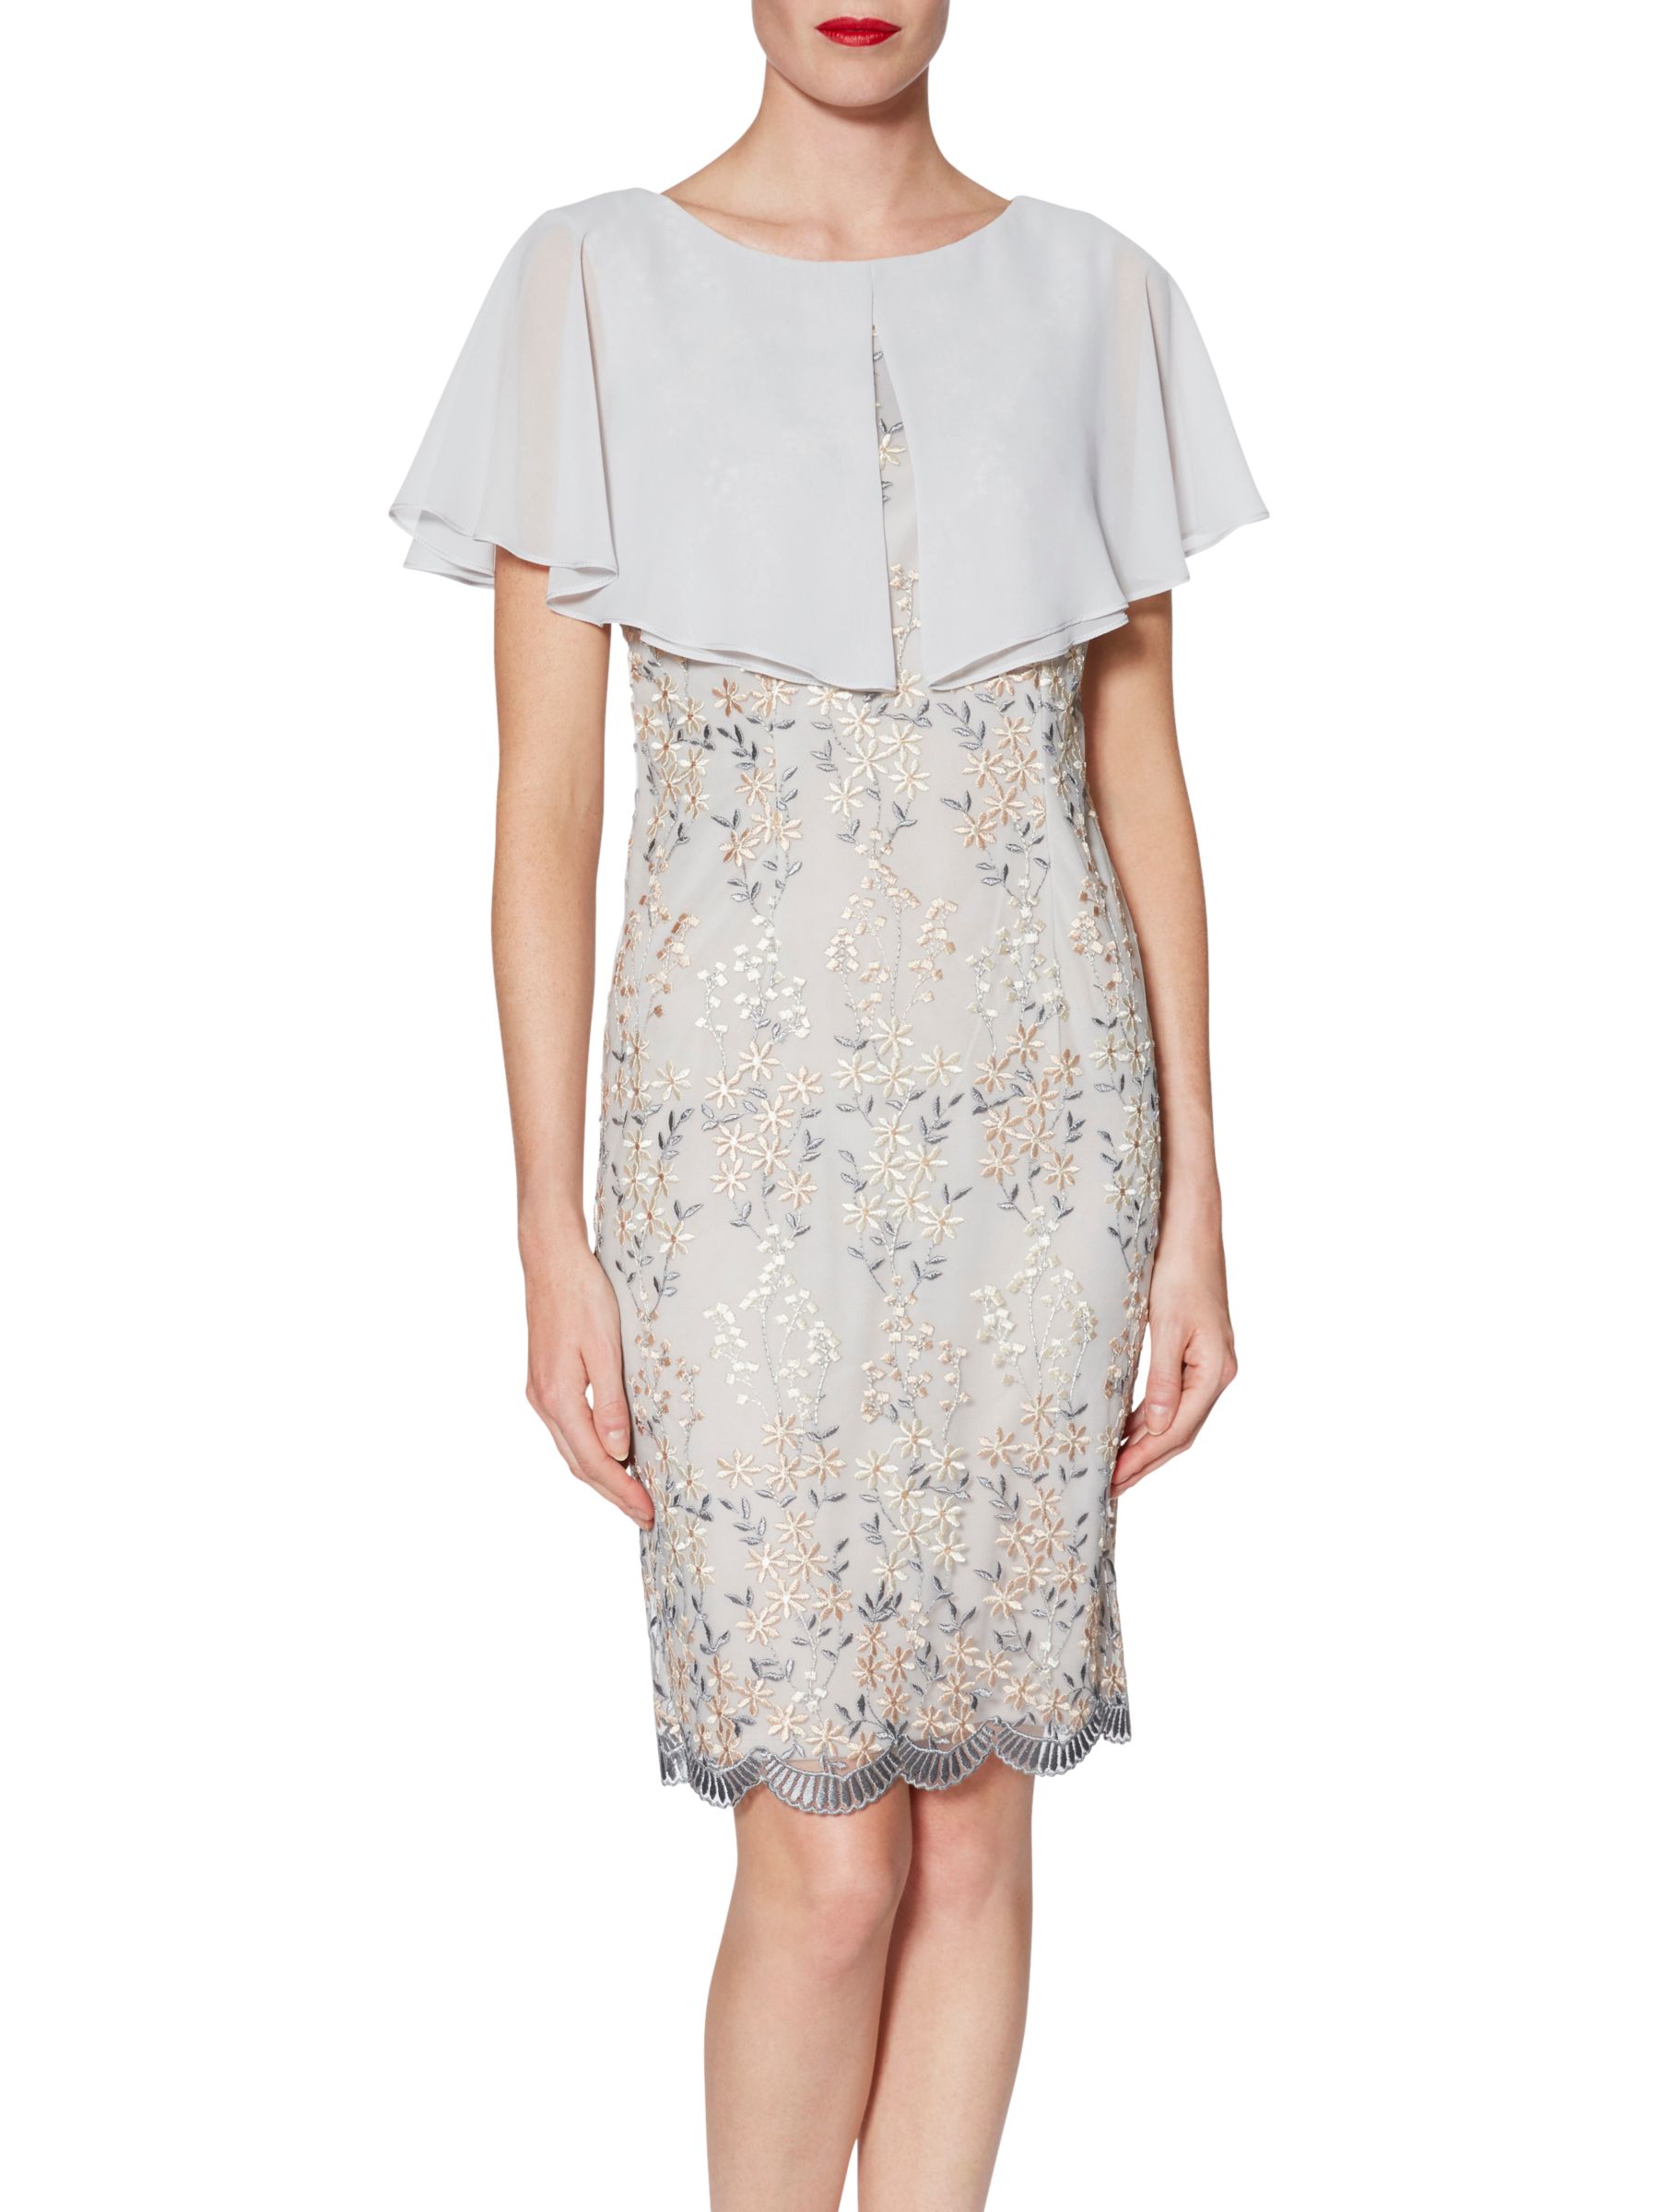 Gina Bacconi Edith Floral Embroidered Dress And Chiffon Cape, Beige